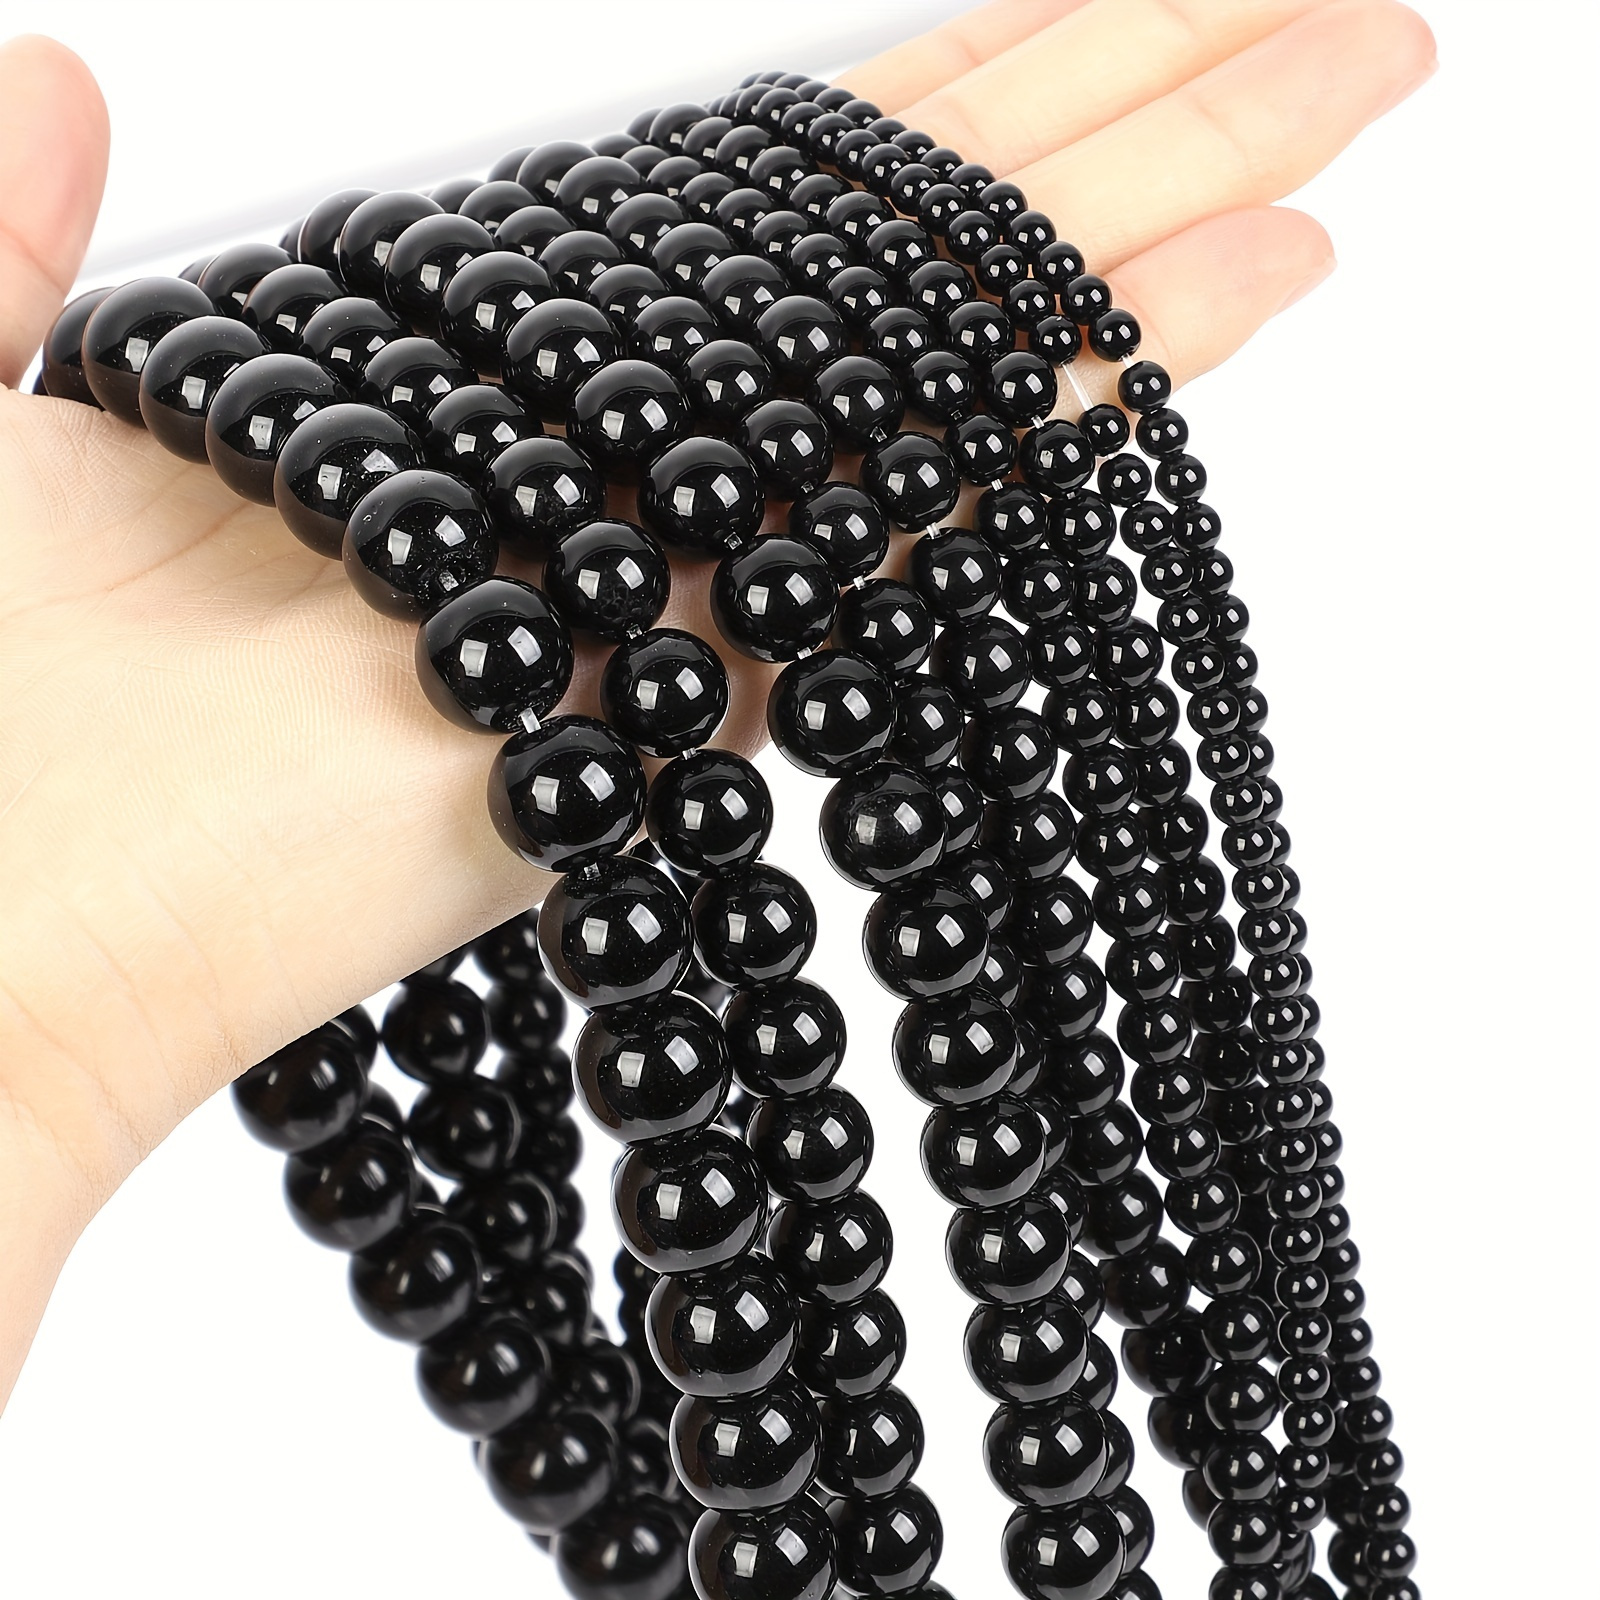 A Strand Natural Black Volcanic Rock 4-12mm, High-Quality Loose Beads For  DIY Bracelets Necklaces And Other Decors Jewelry Making Craft Supplies